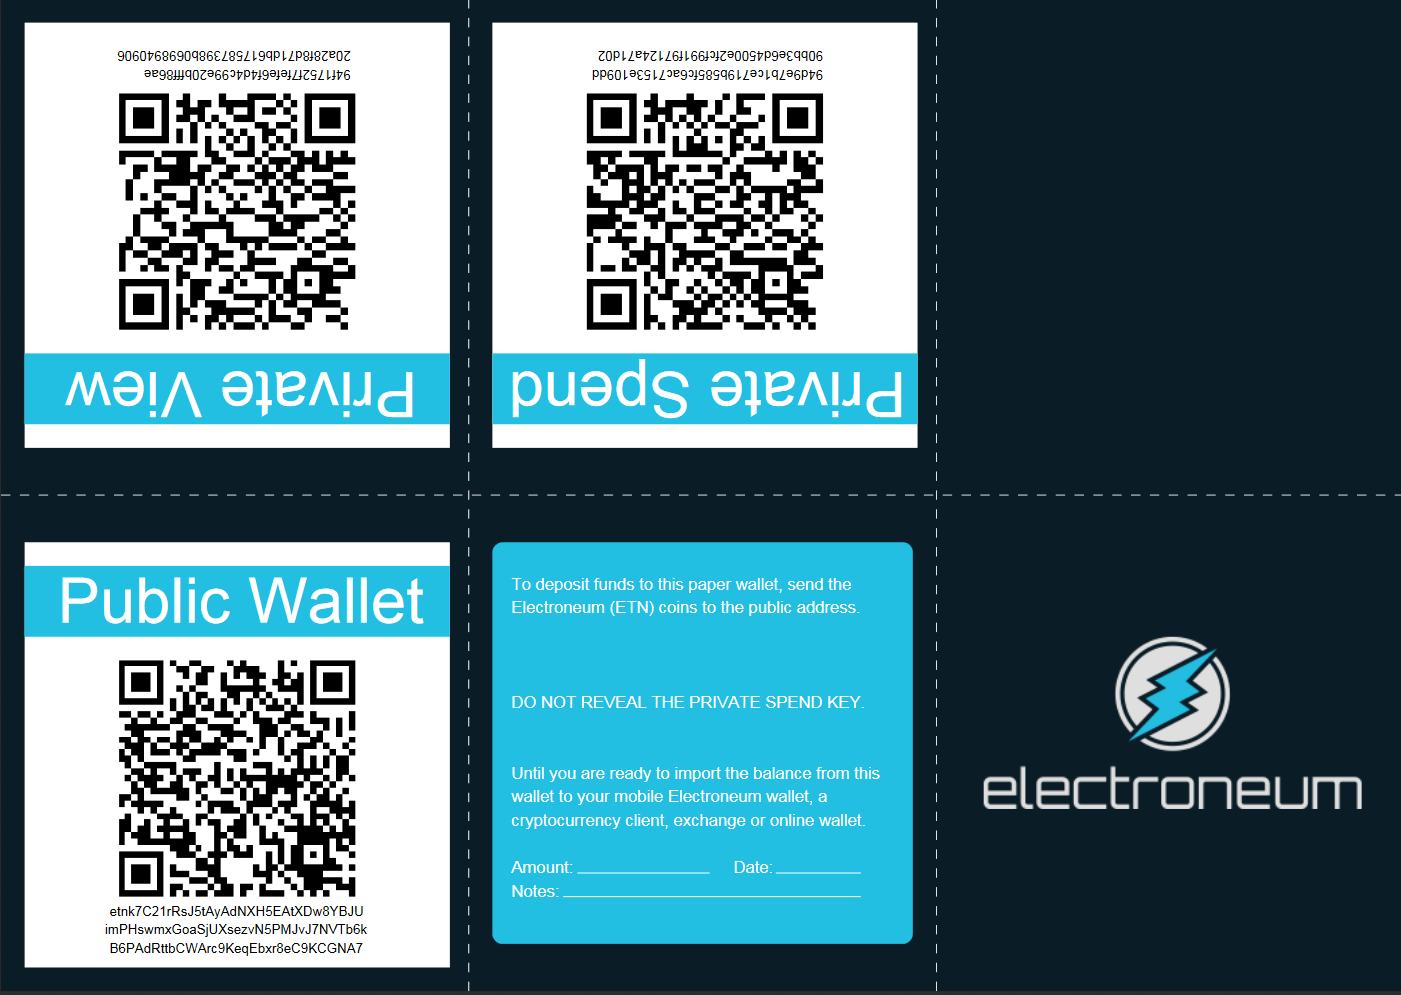 How do I check my Electroneum wallet?